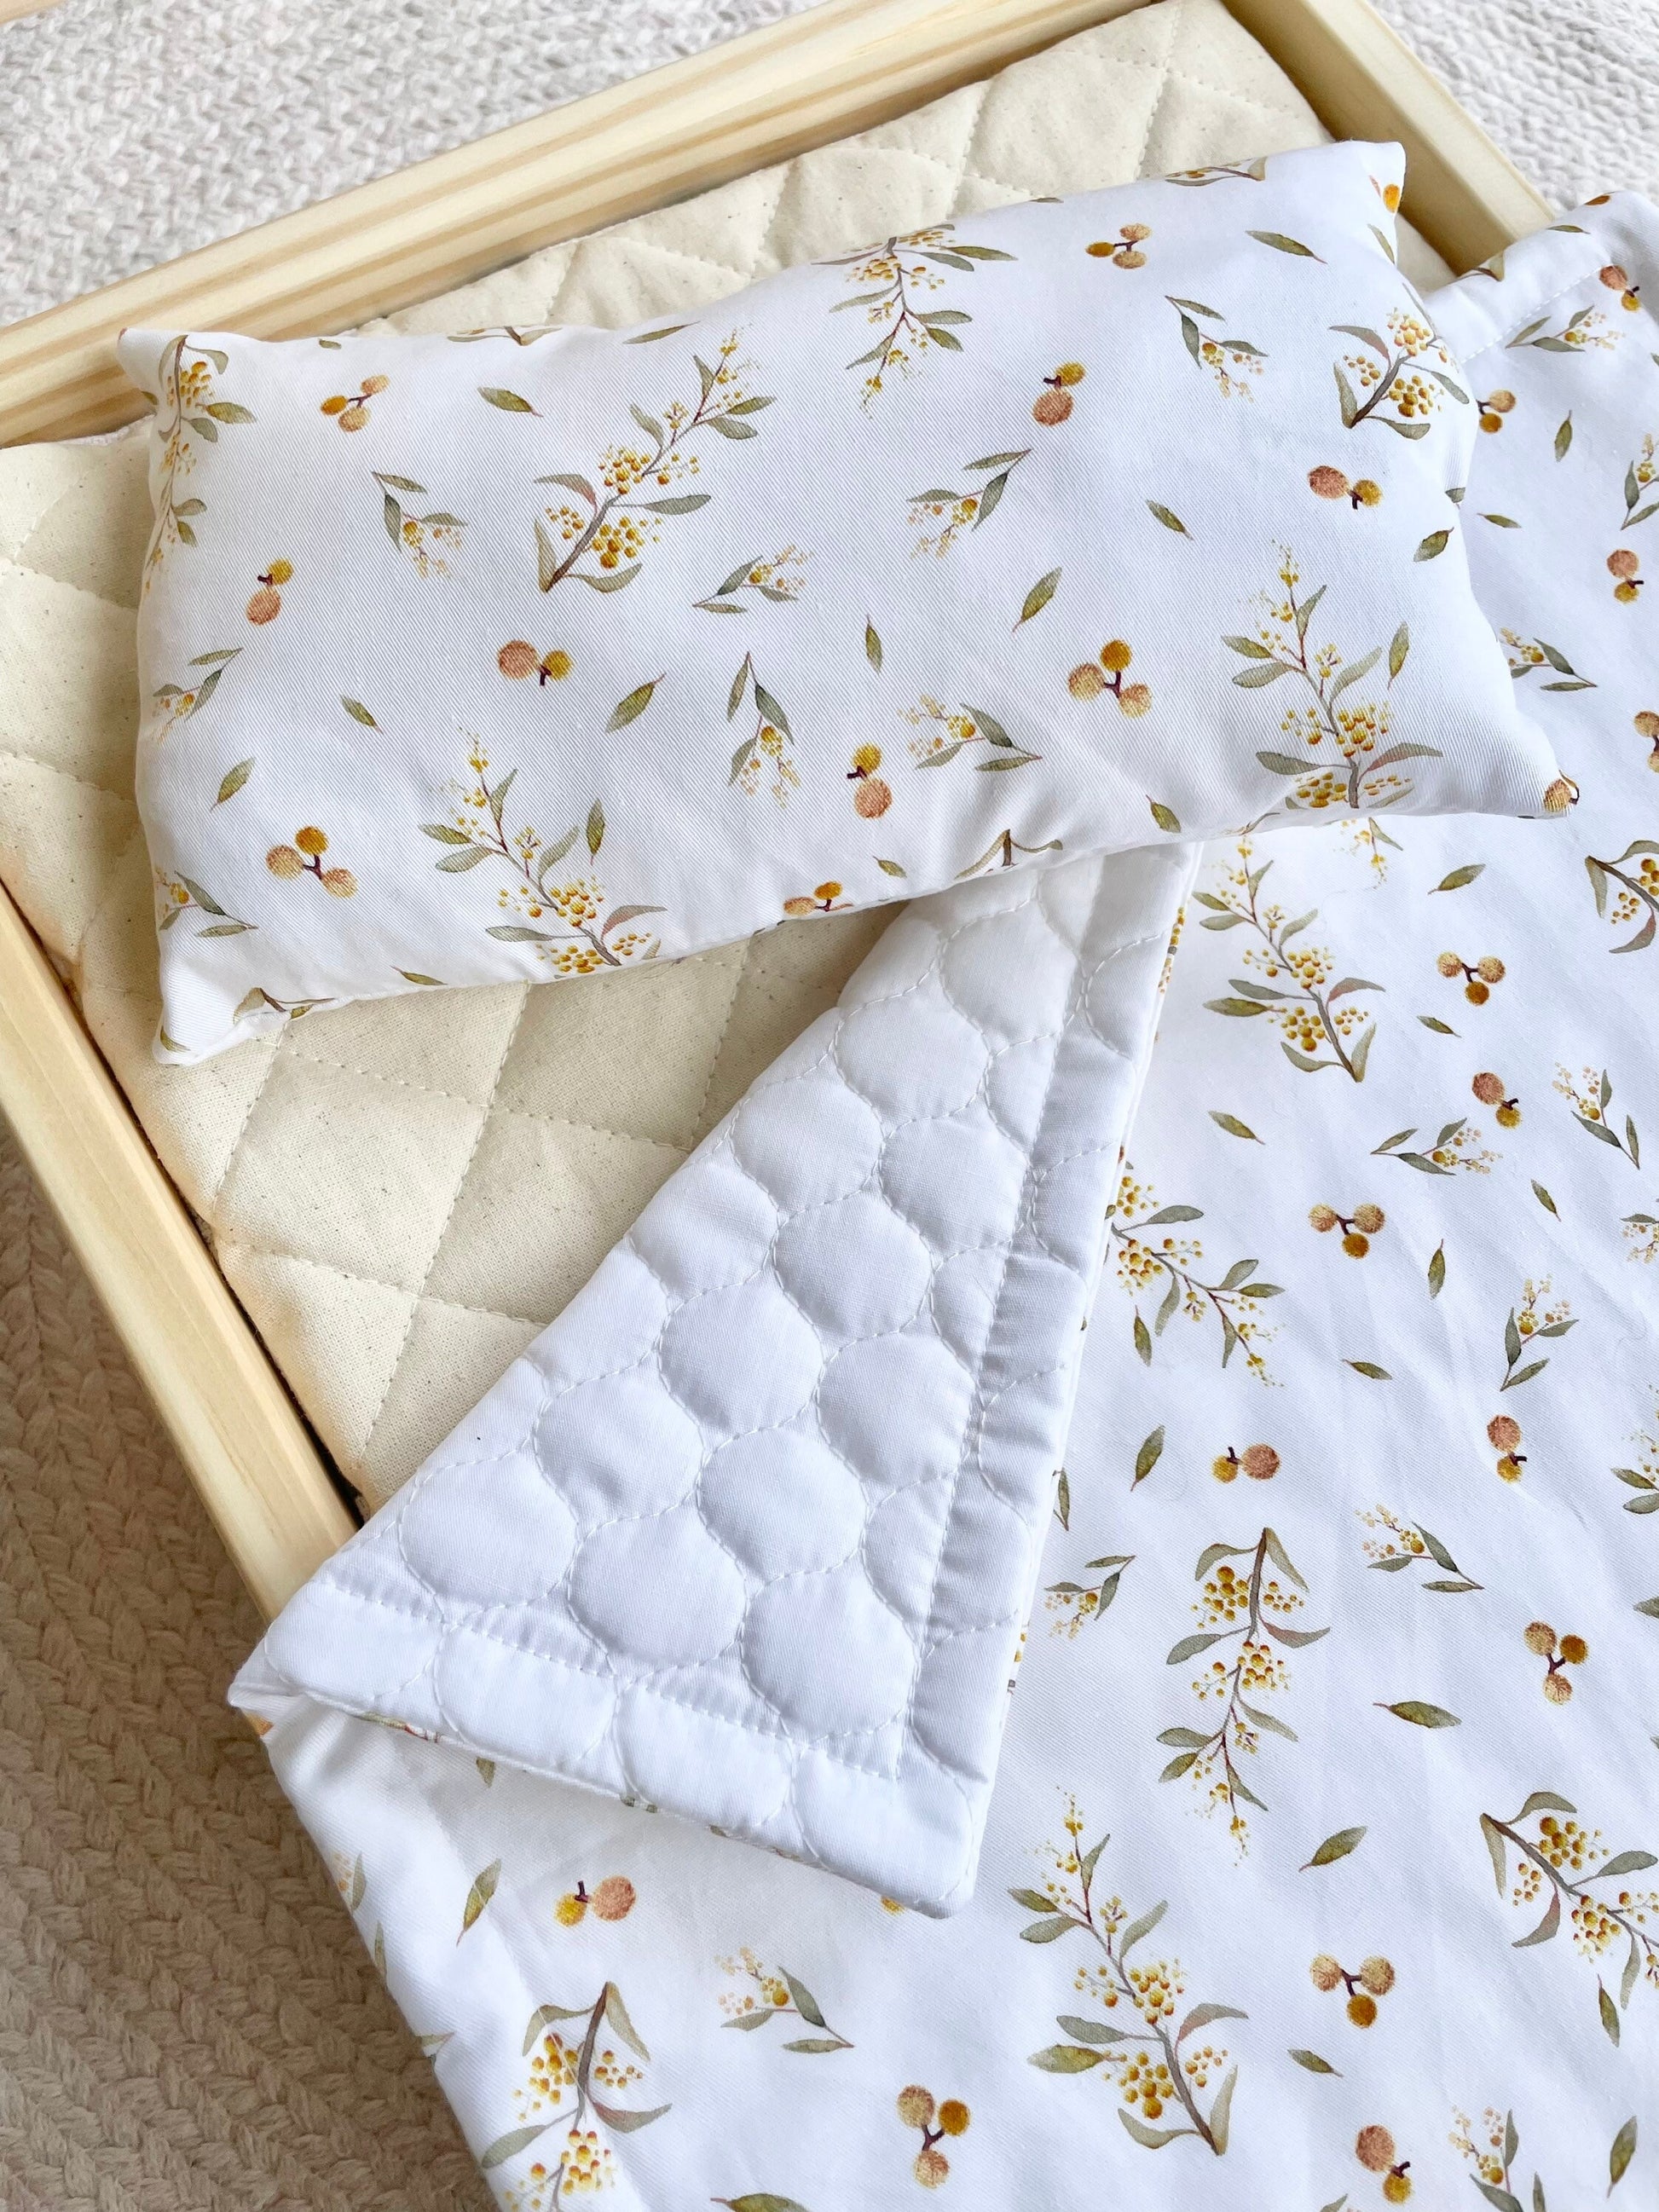 Baby Doll Wattle Bedding Set | Pretend Play Accessories | Doll Crib Bedding | Ikea Kmart Doll Bed | Doll Quilt Accessories | Toy Bed Bedding